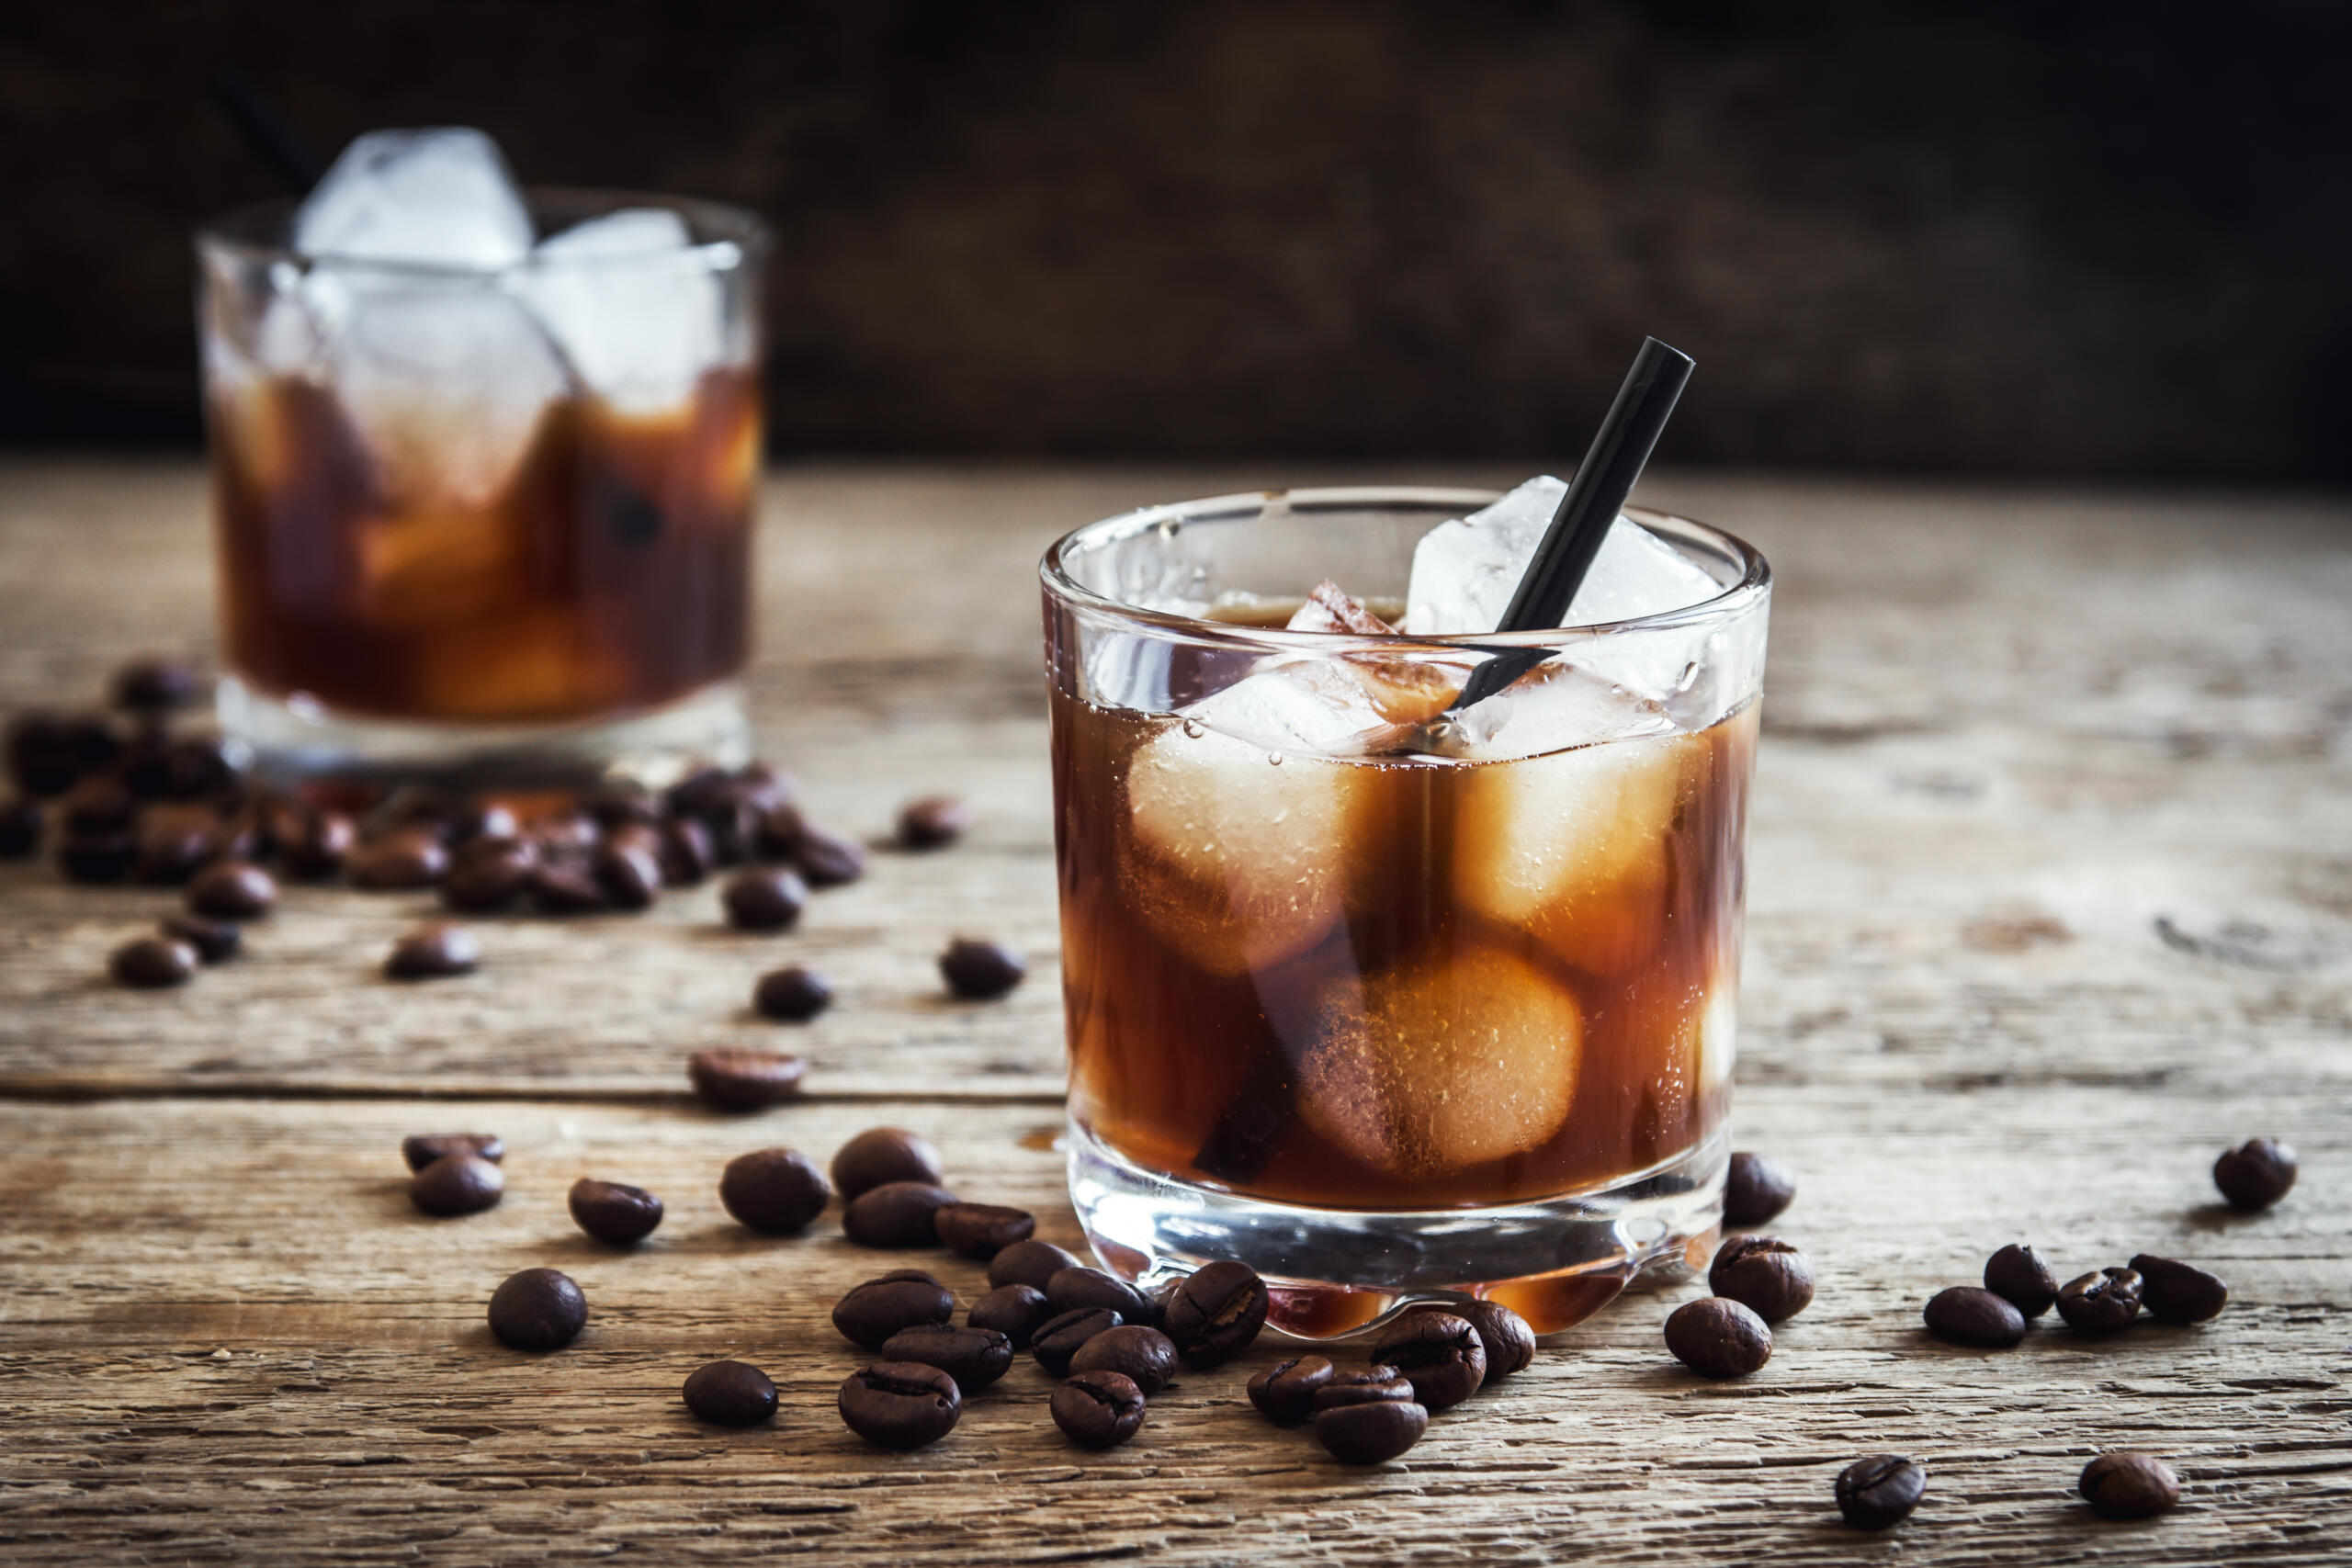 Is It Okay To Mix Coffee and Alcohol?